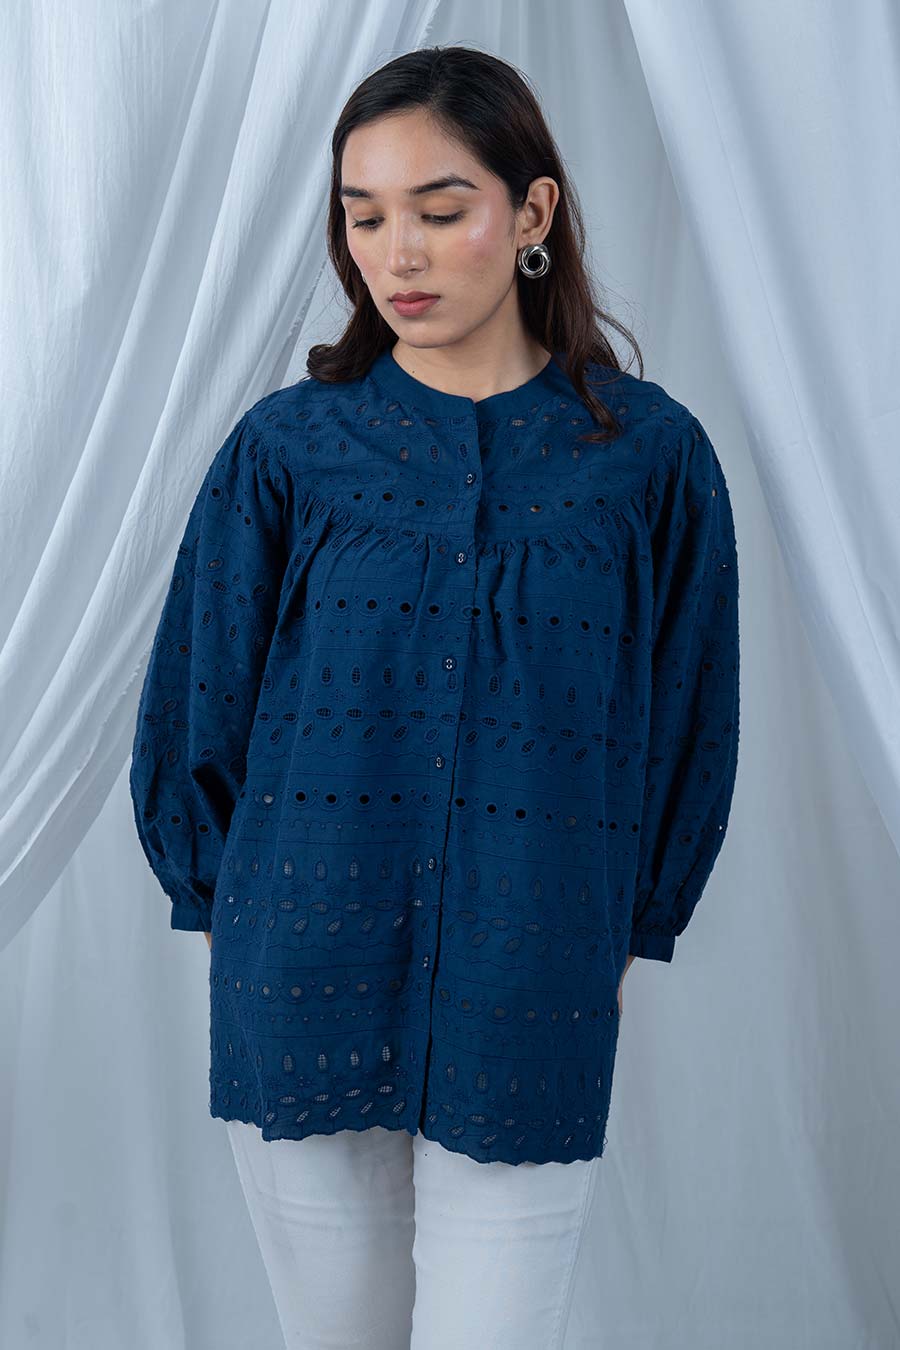 Navy Blue Cotton Embroidered Top